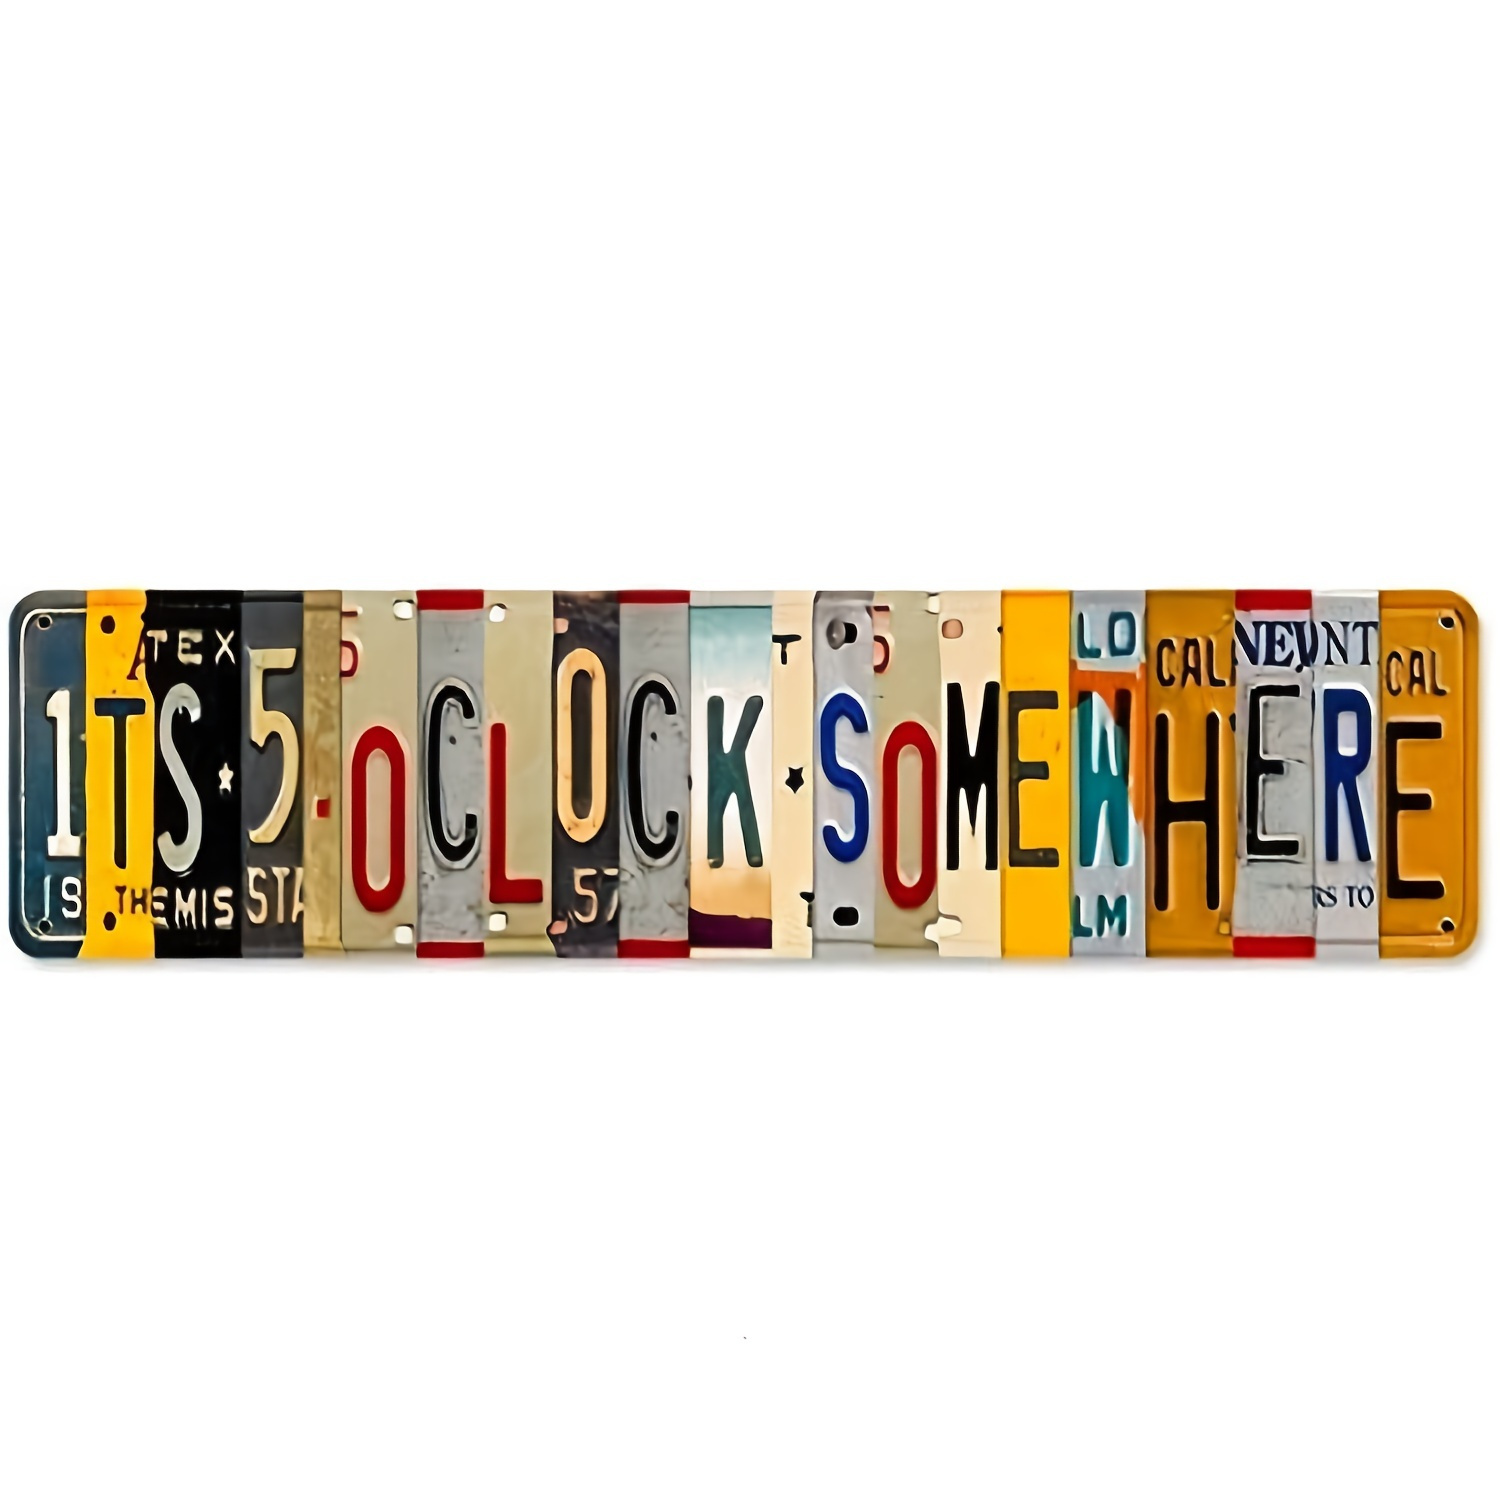 

1pc 5 O Clock Somewhere Unique Metal Wall Decor For Home, Bar, Diner, Pub, 16 X 4 Inches, Fun Kitchen Decor, Unique Drinking Sign, Funny Bar Signs, Vintage Kitchen Signs, Home Decor